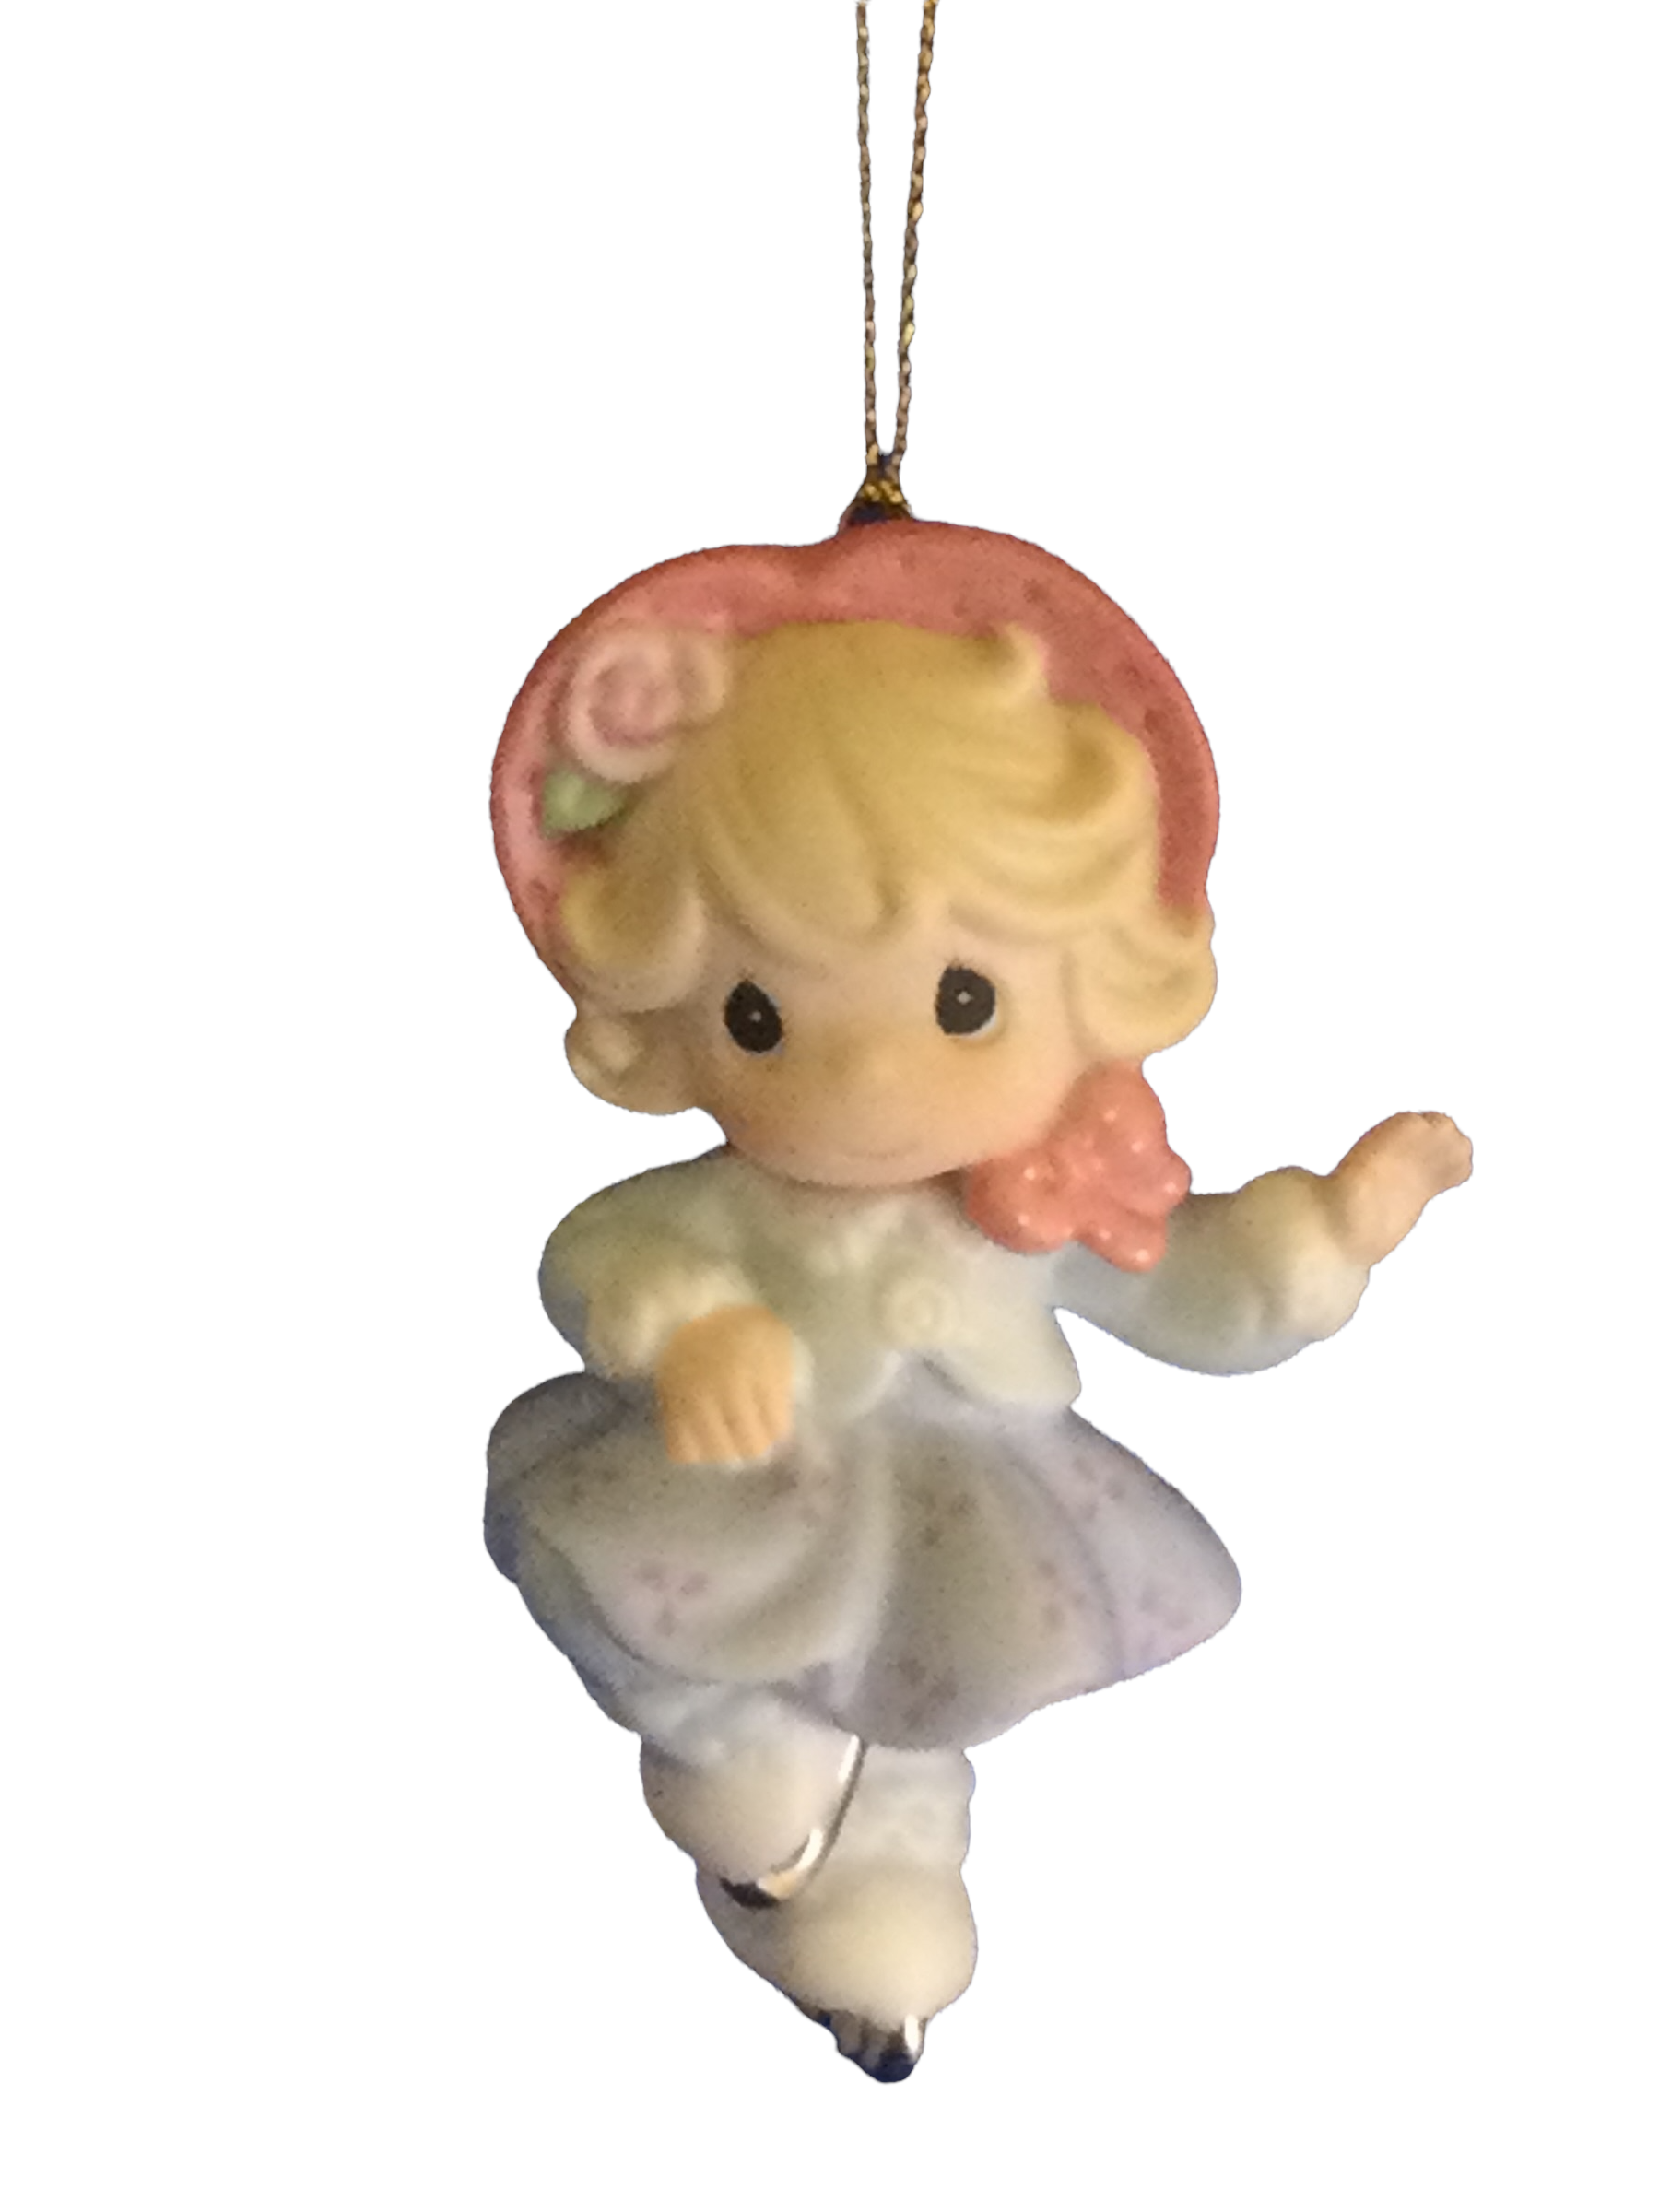 One Good Turn Deserves Another - Precious Moment Porcelain Ornament